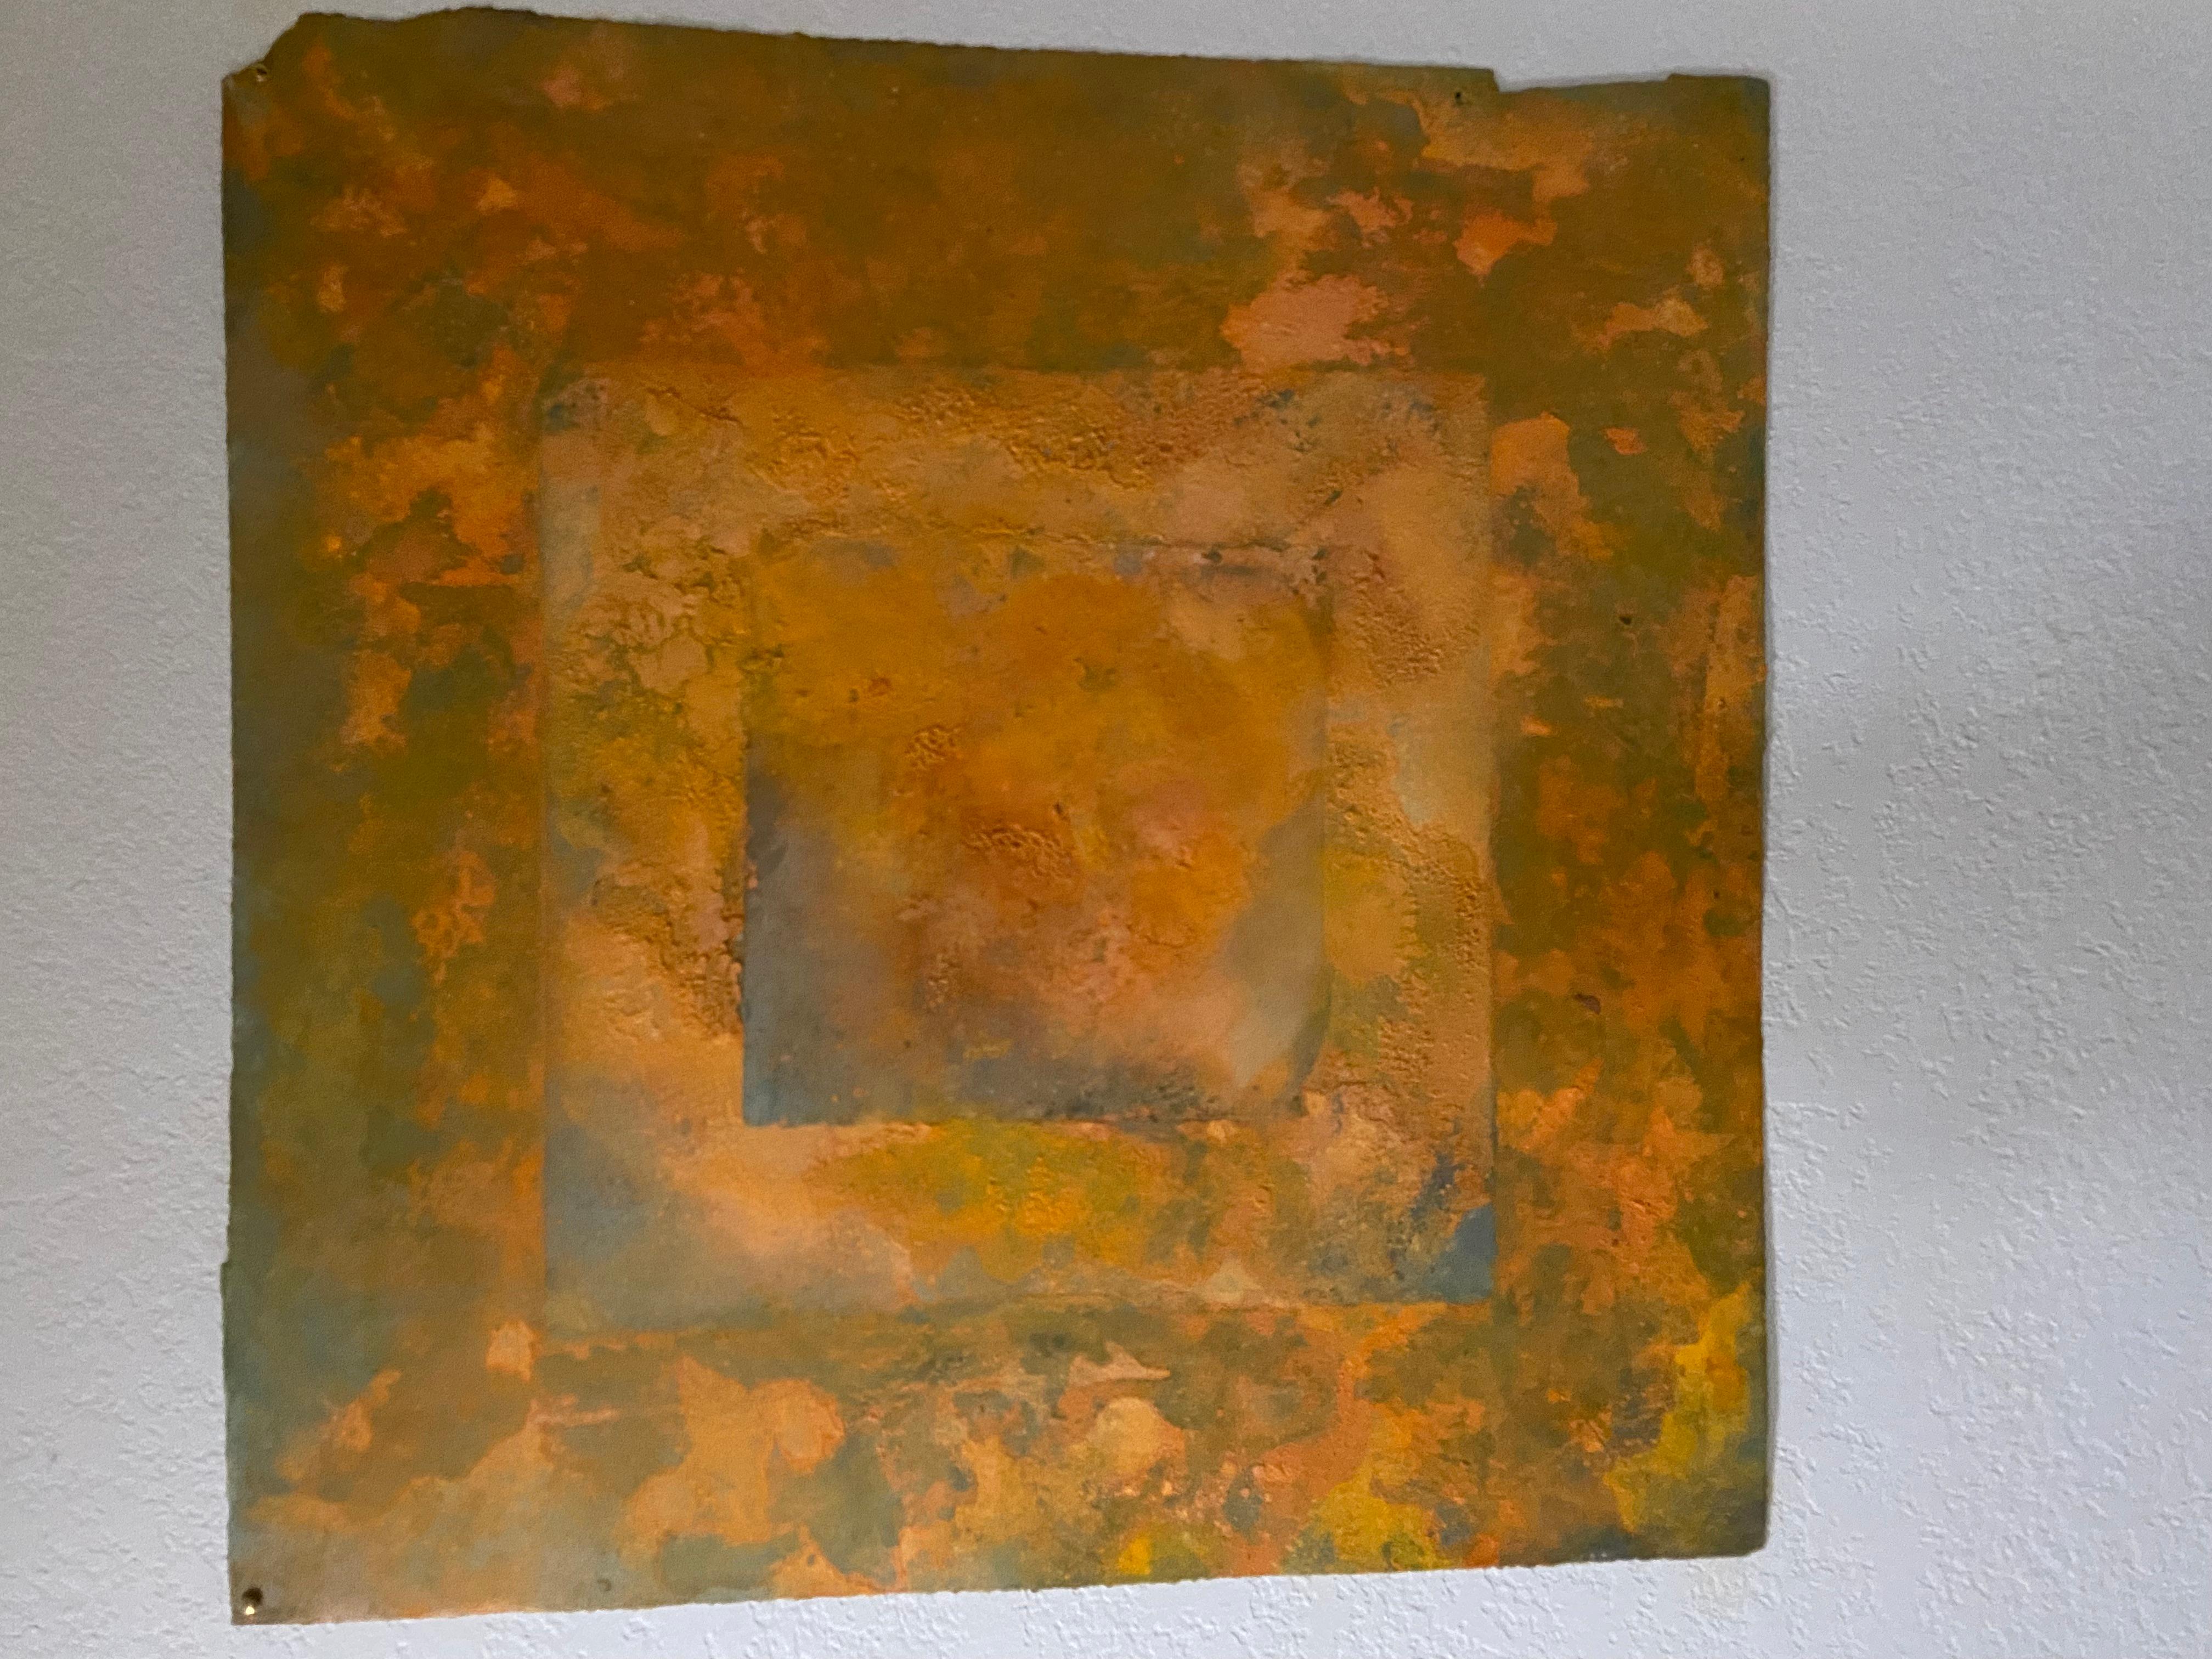 Yellow and gold on paper.....abstract with pigment - Mixed Media Art by Pamela Stockamore